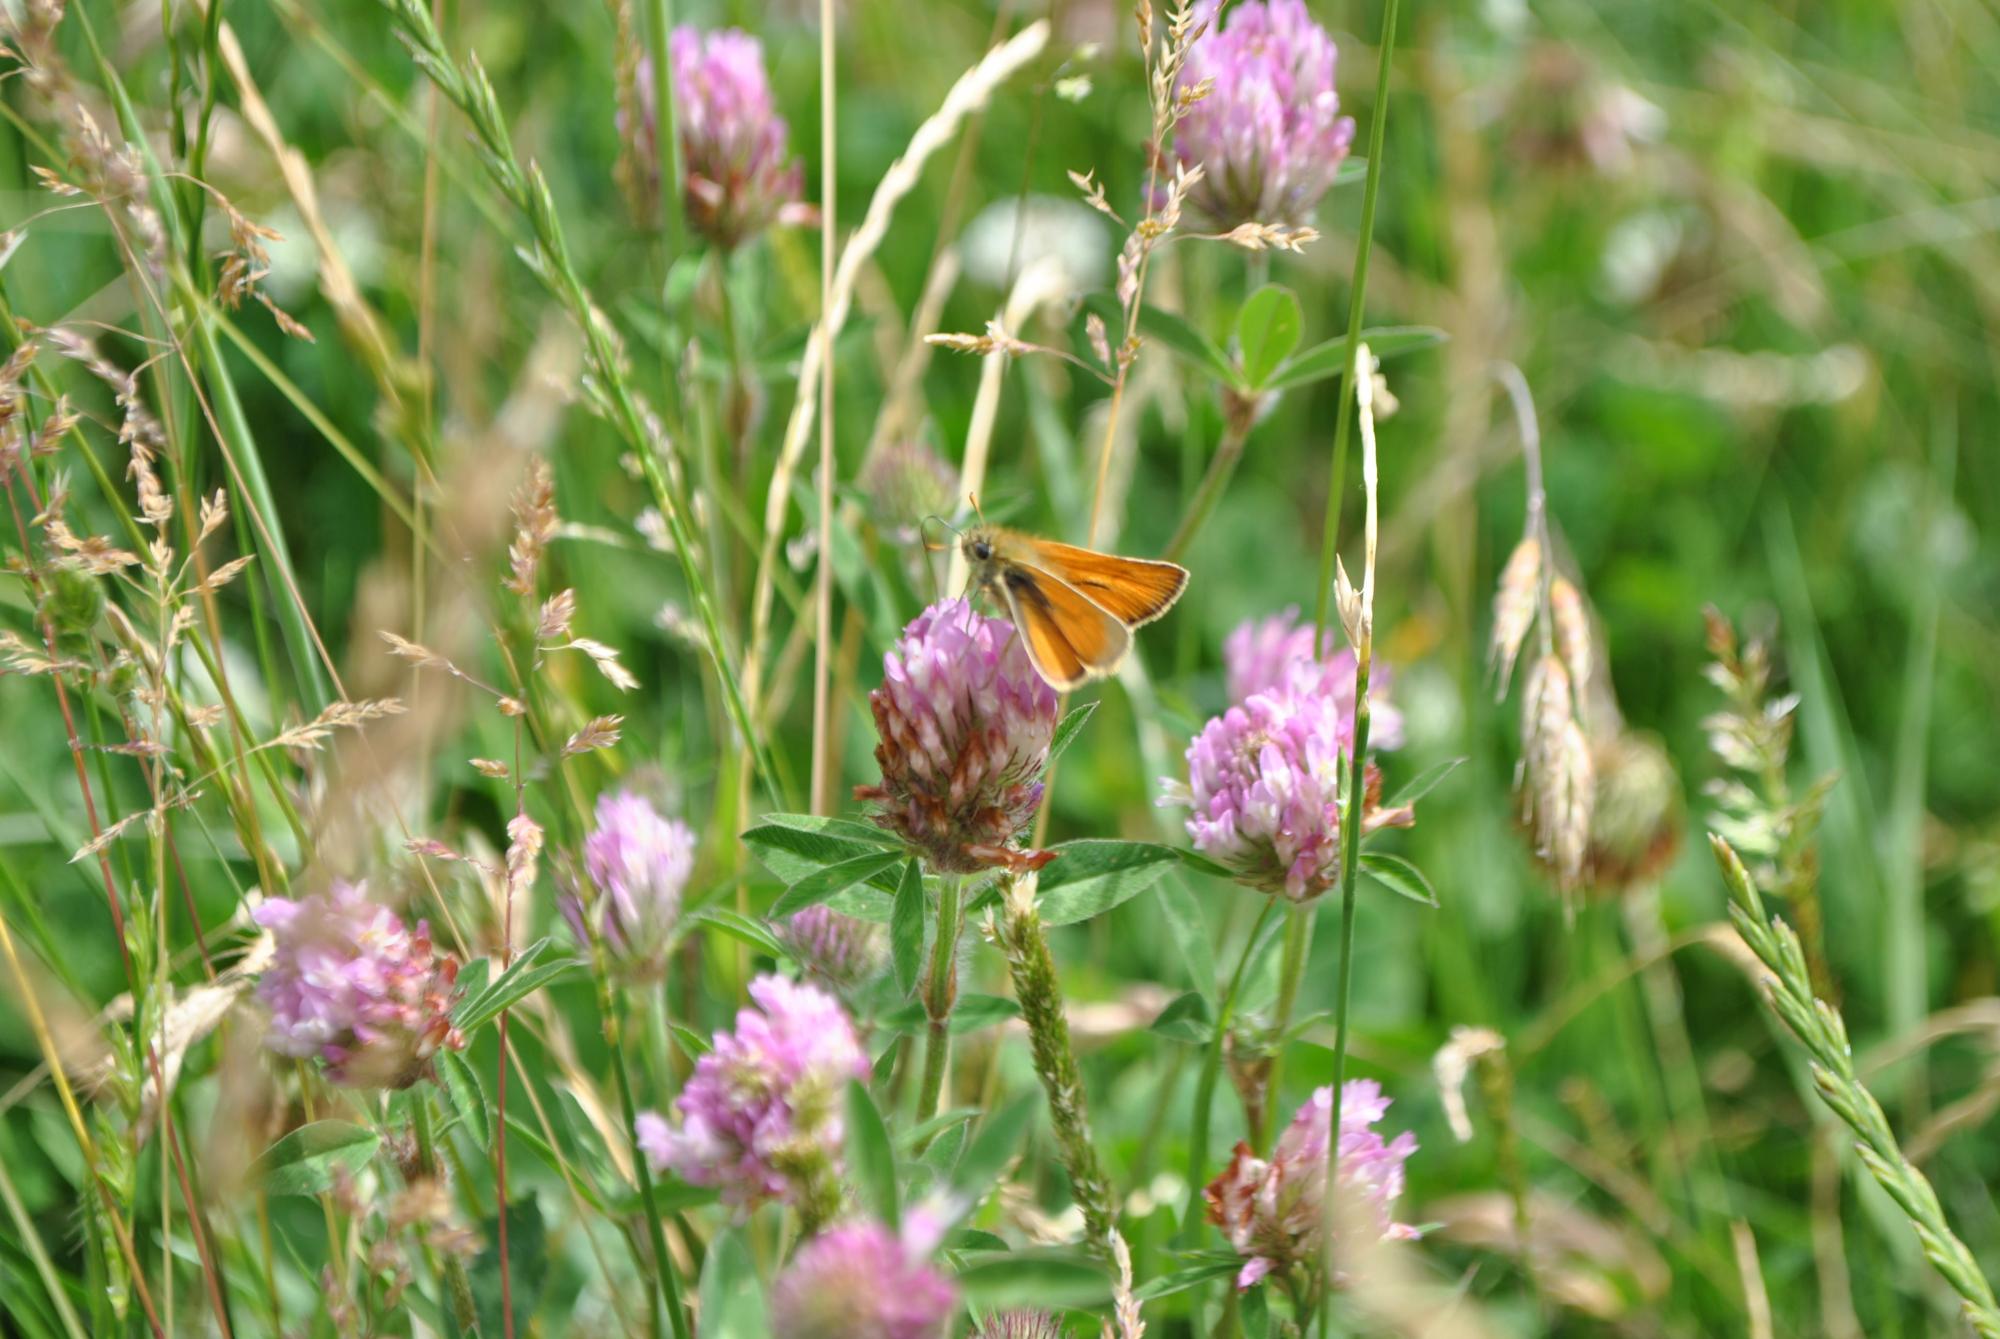 A Skipper butterfly in the grassy meadow with grass and clover